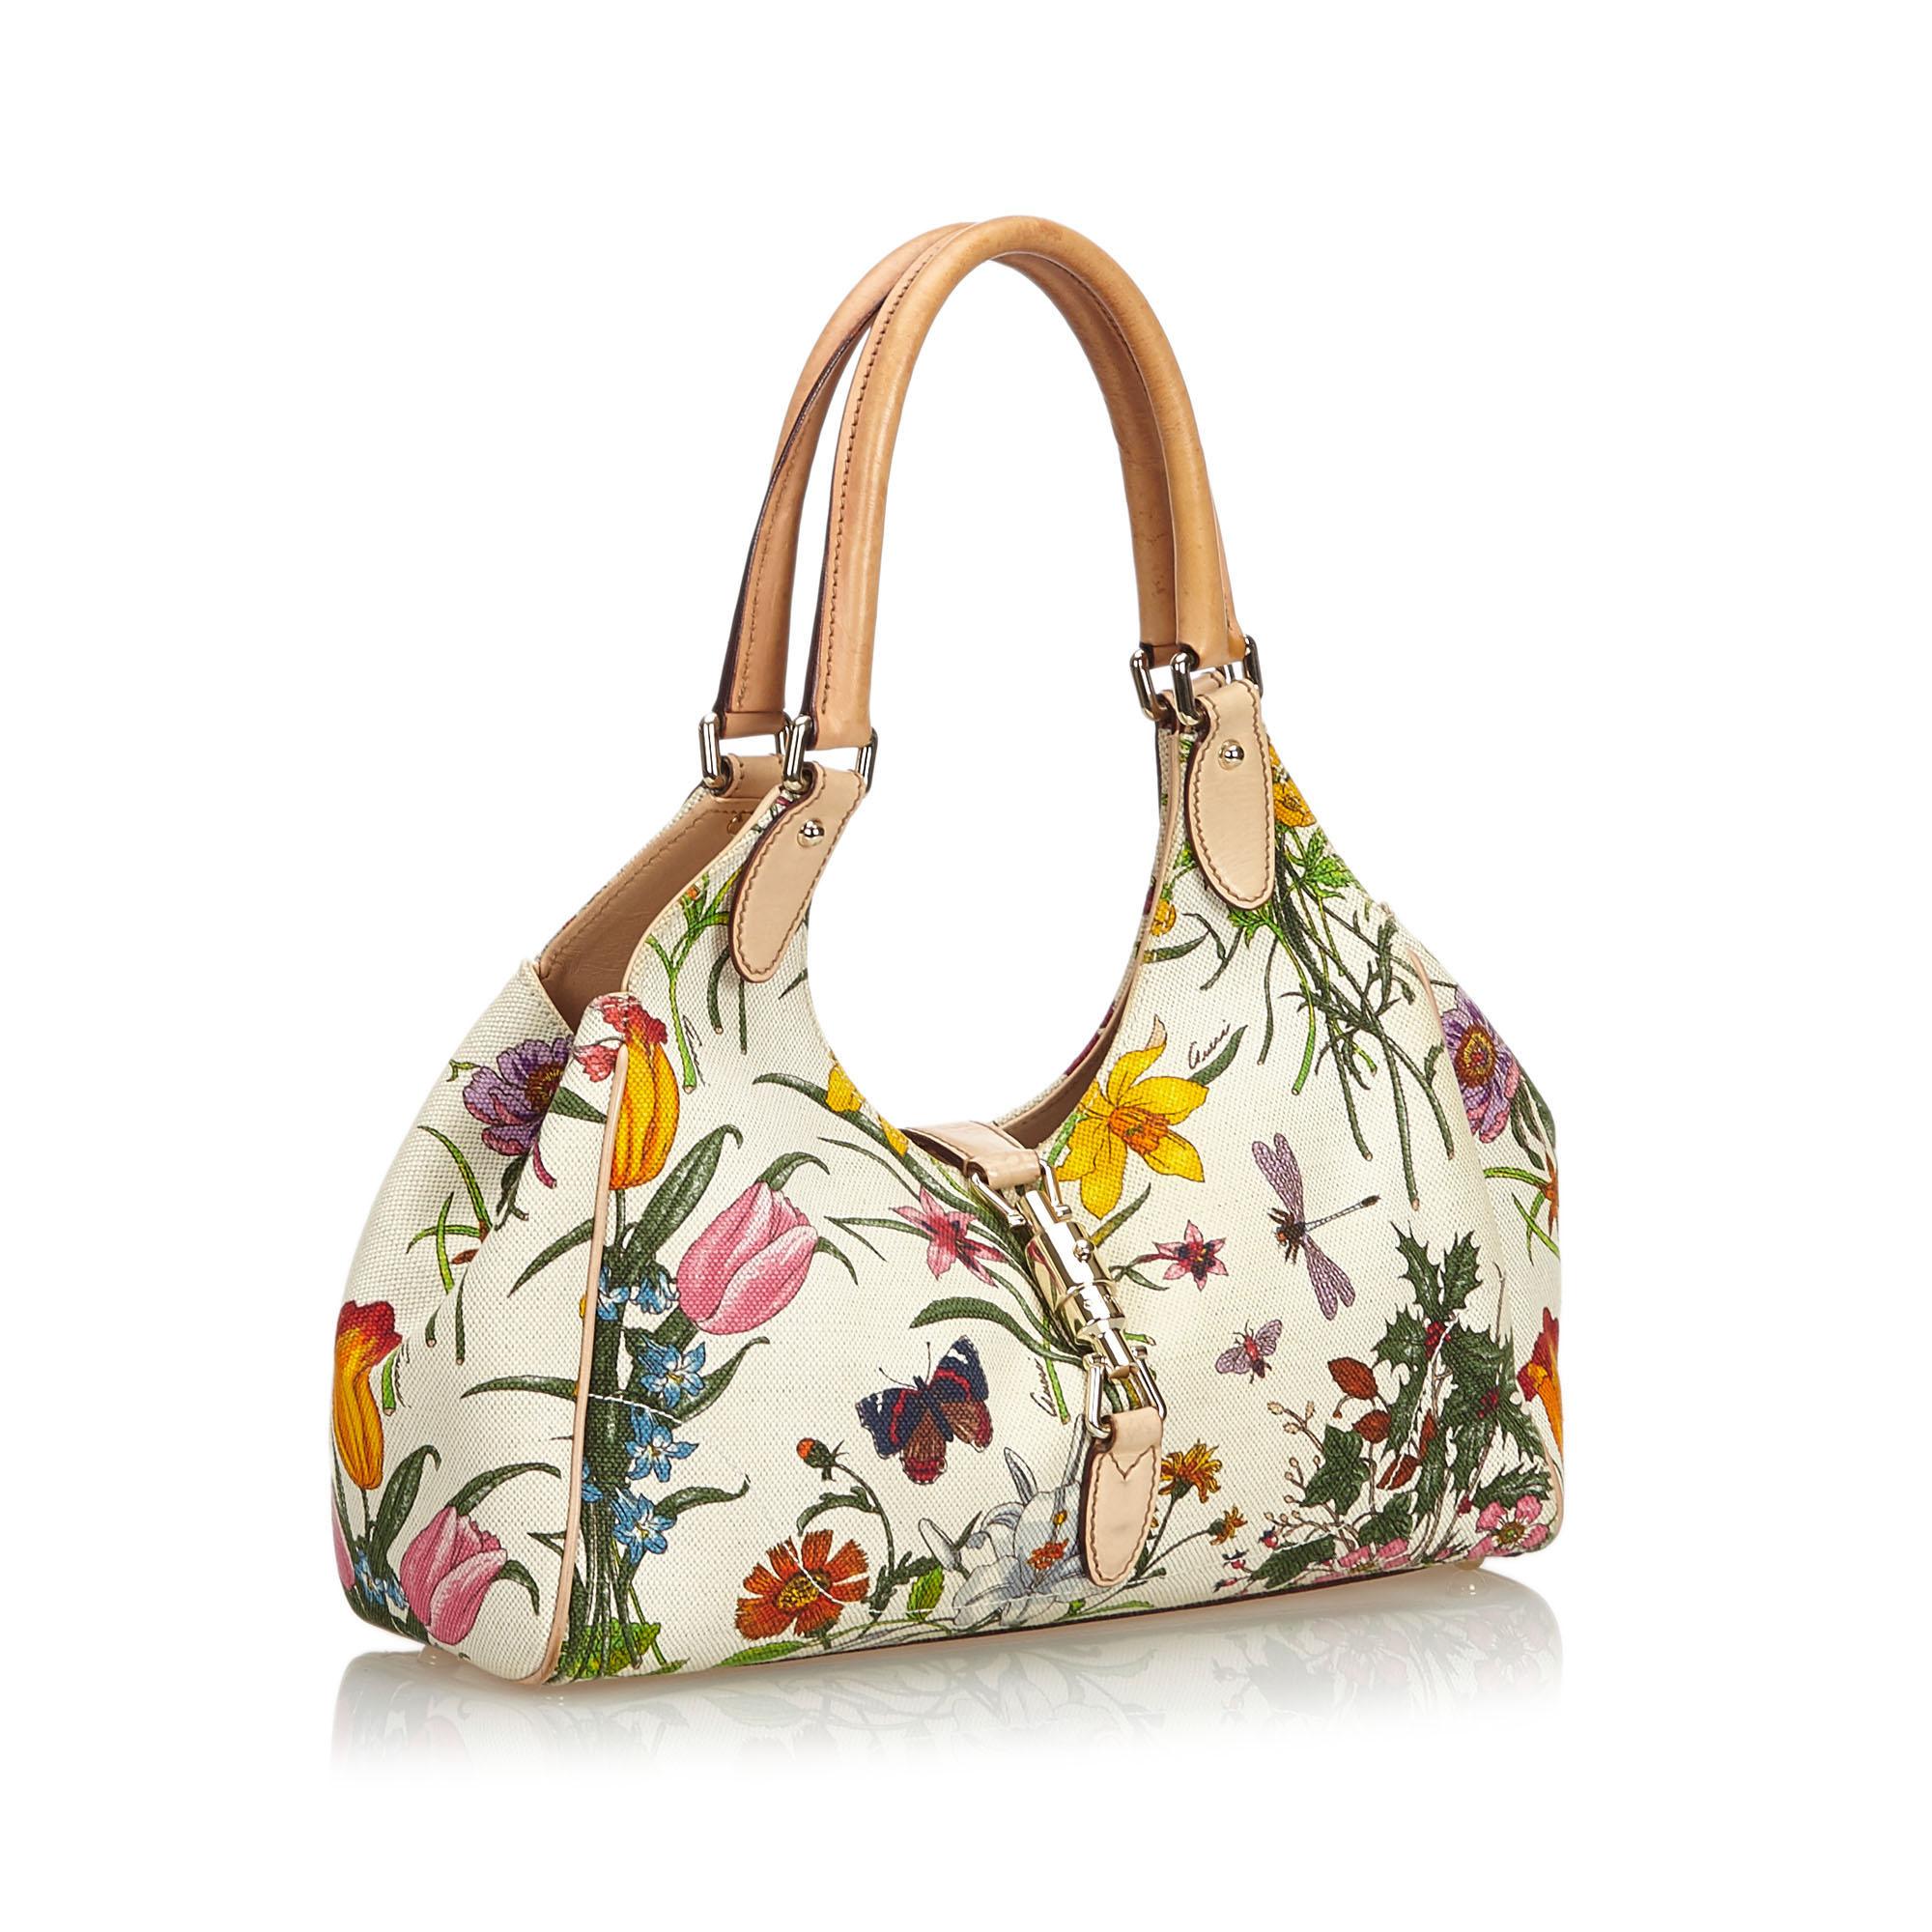 The New Jackie features a floral print on a canvas body, rolled leather straps, a leather strap with a lock closure, and an interior zip pocket. It carries as B condition rating.

Inclusions: 
This item does not come with